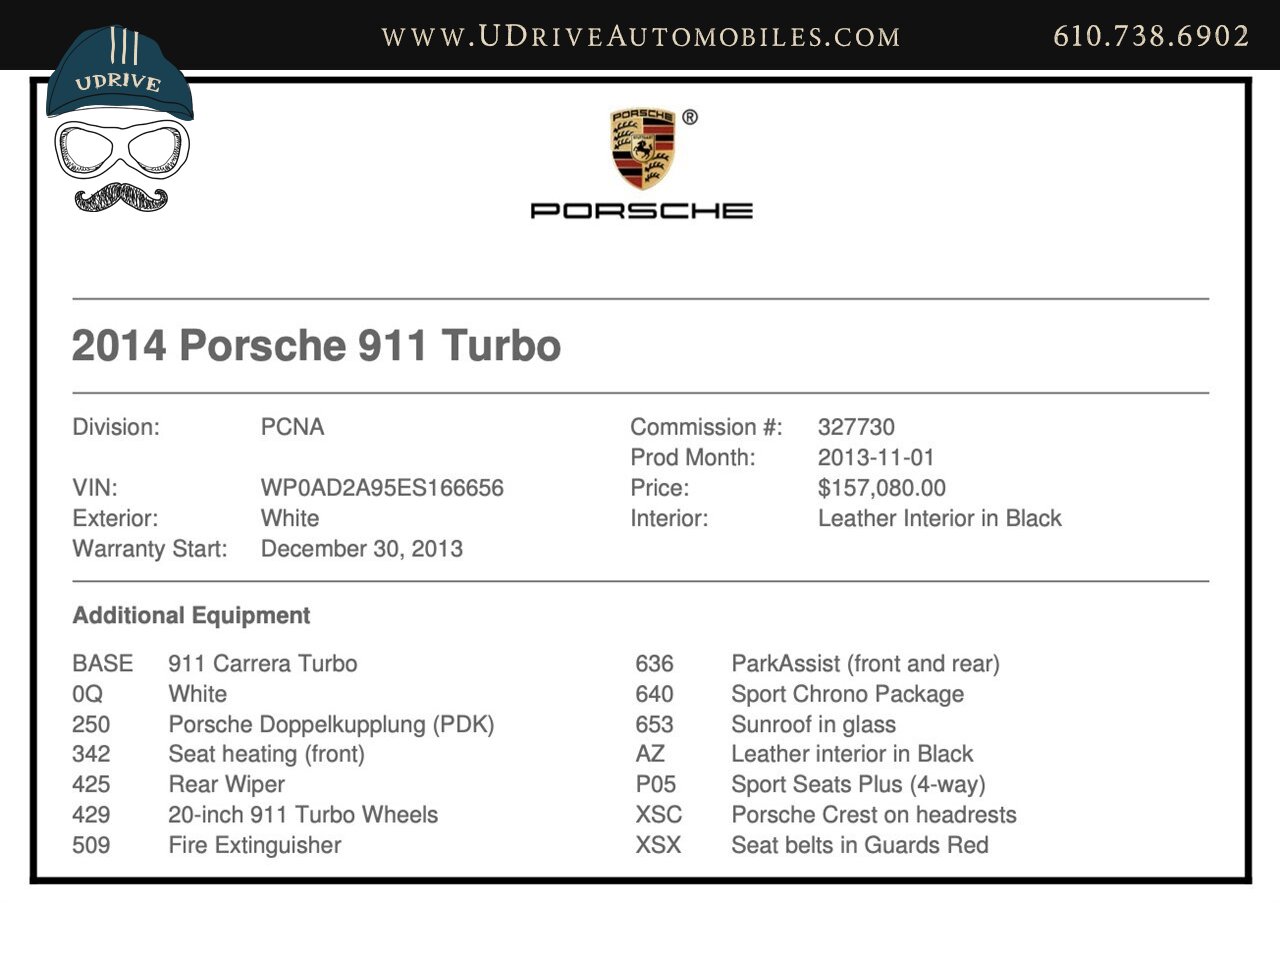 2014 Porsche 911 Turbo 12k Miles White over Black Chrono Rear Wiper  Sport Seats 20in Turbo Whls Sunroof Red Belts - Photo 2 - West Chester, PA 19382